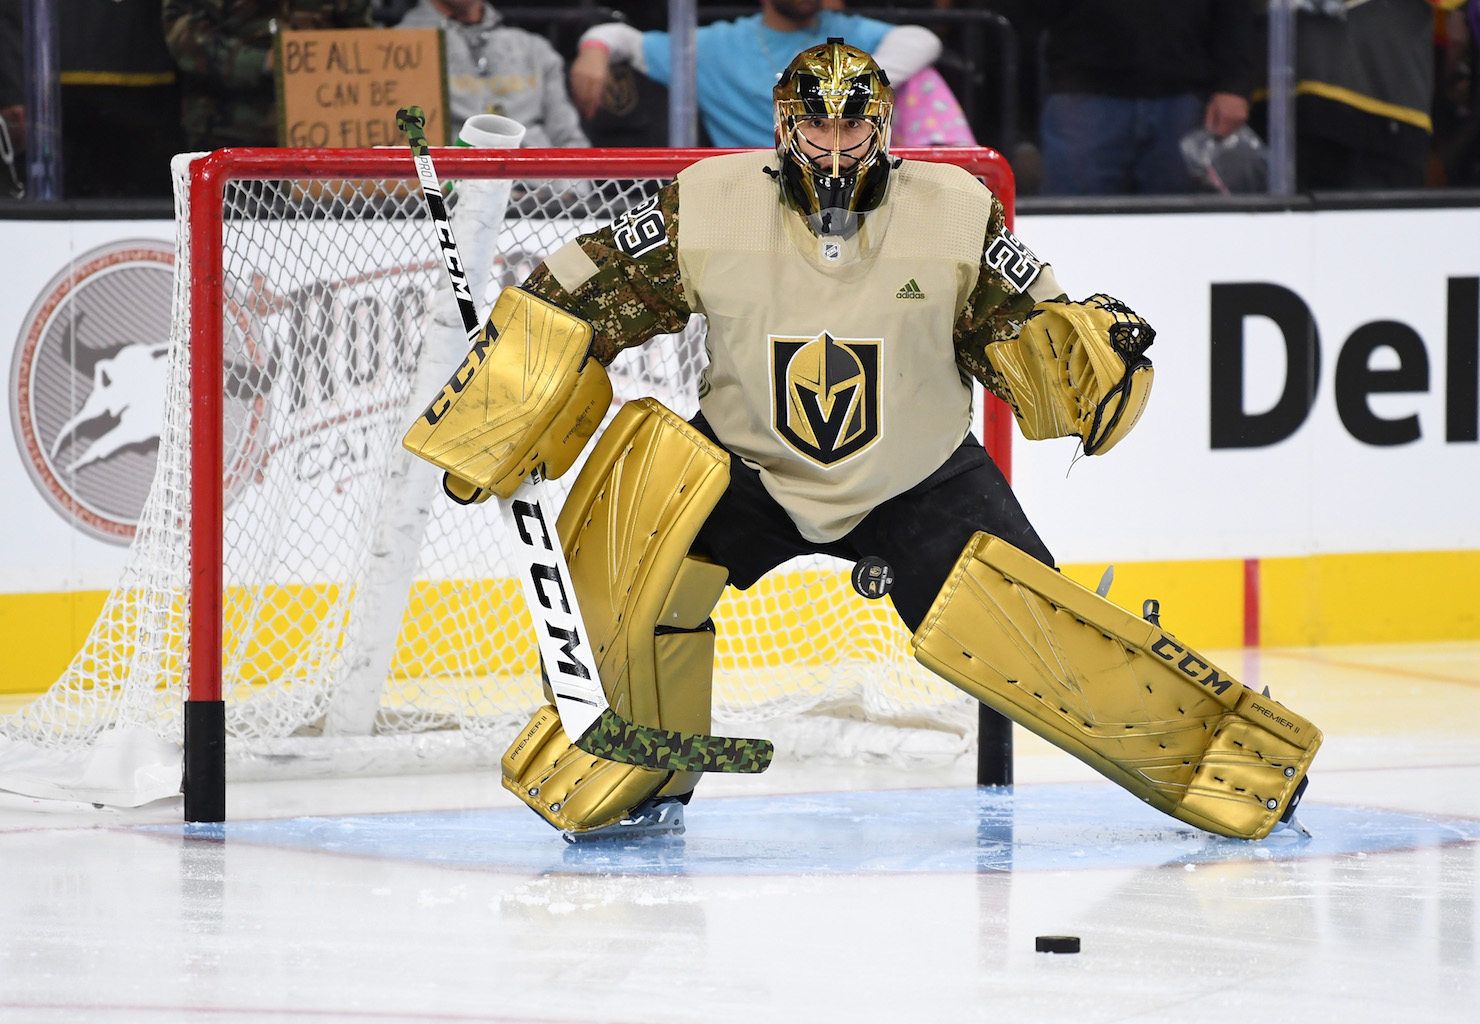 Marc-Andre Fleury's pads for next season. : r/hockey